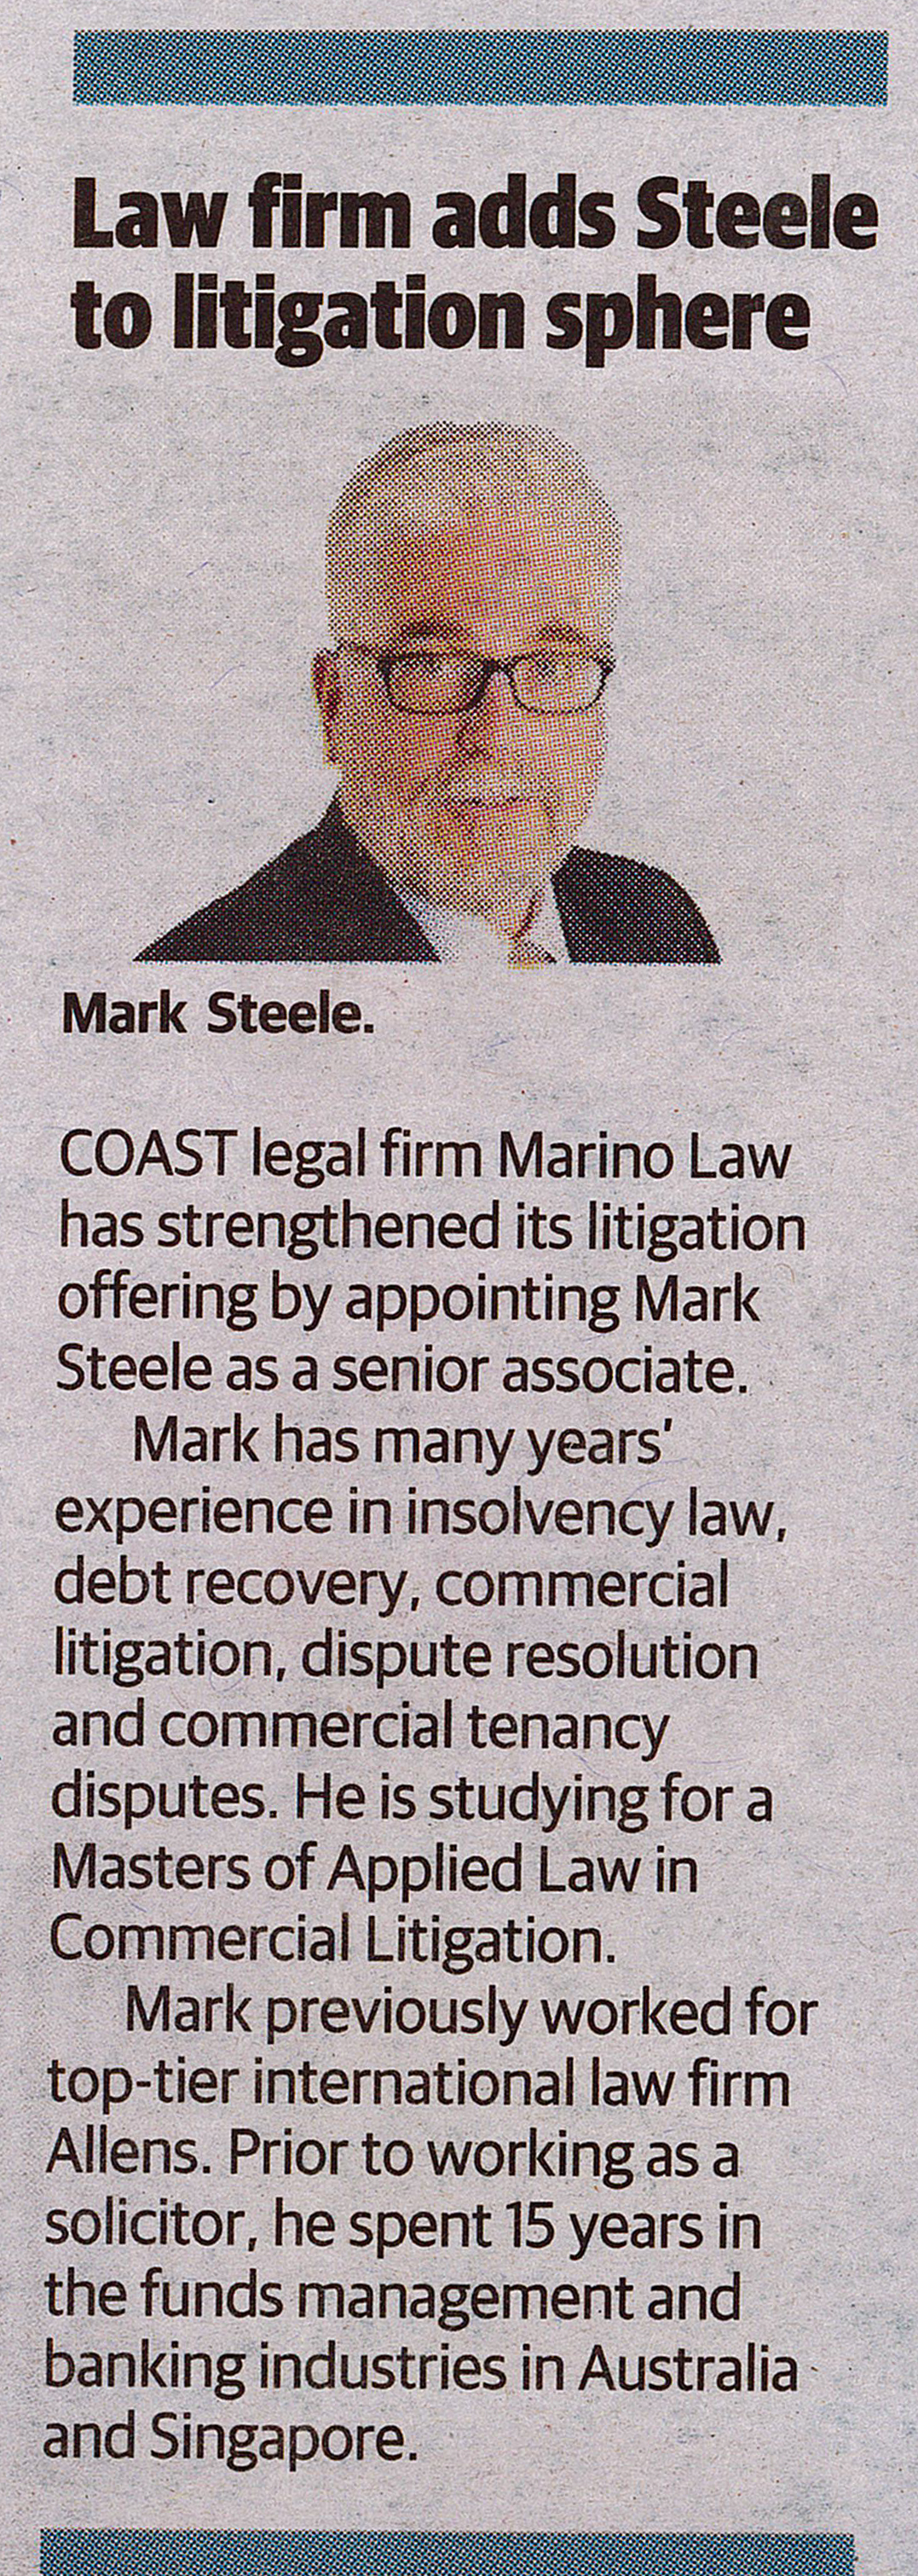 Marino Law Strengthens Litigation Offering